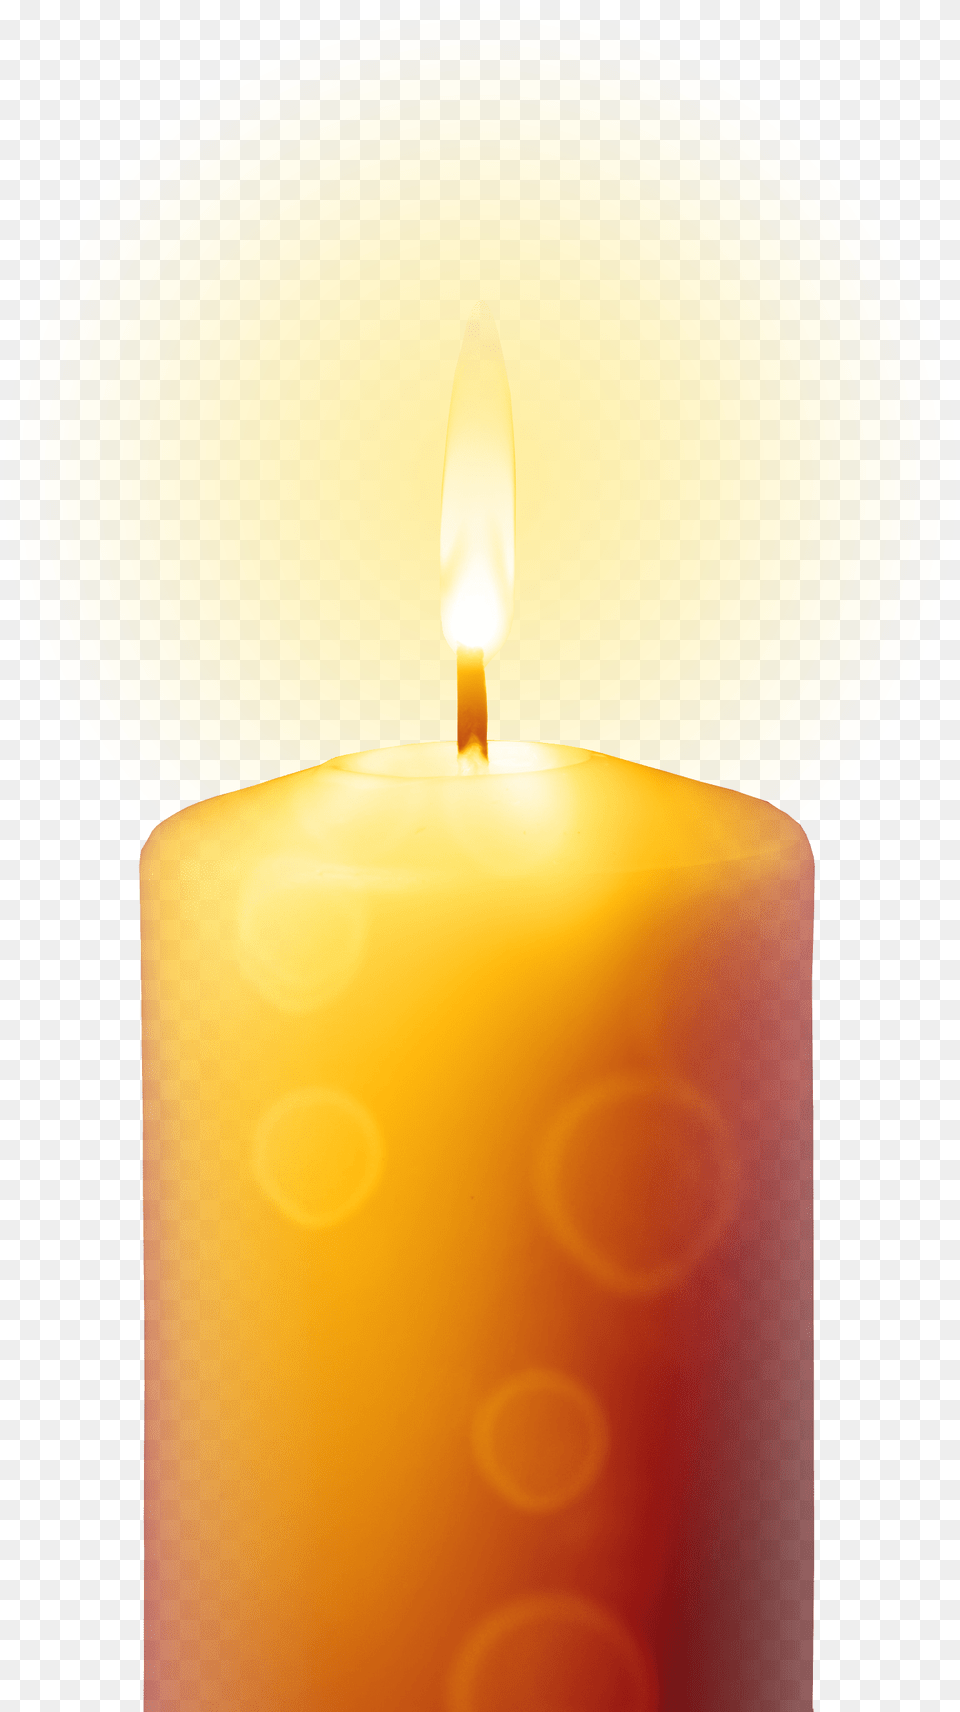 Hd Images Of Light Full Maps Locations Rest In Peace Candle Free Png Download